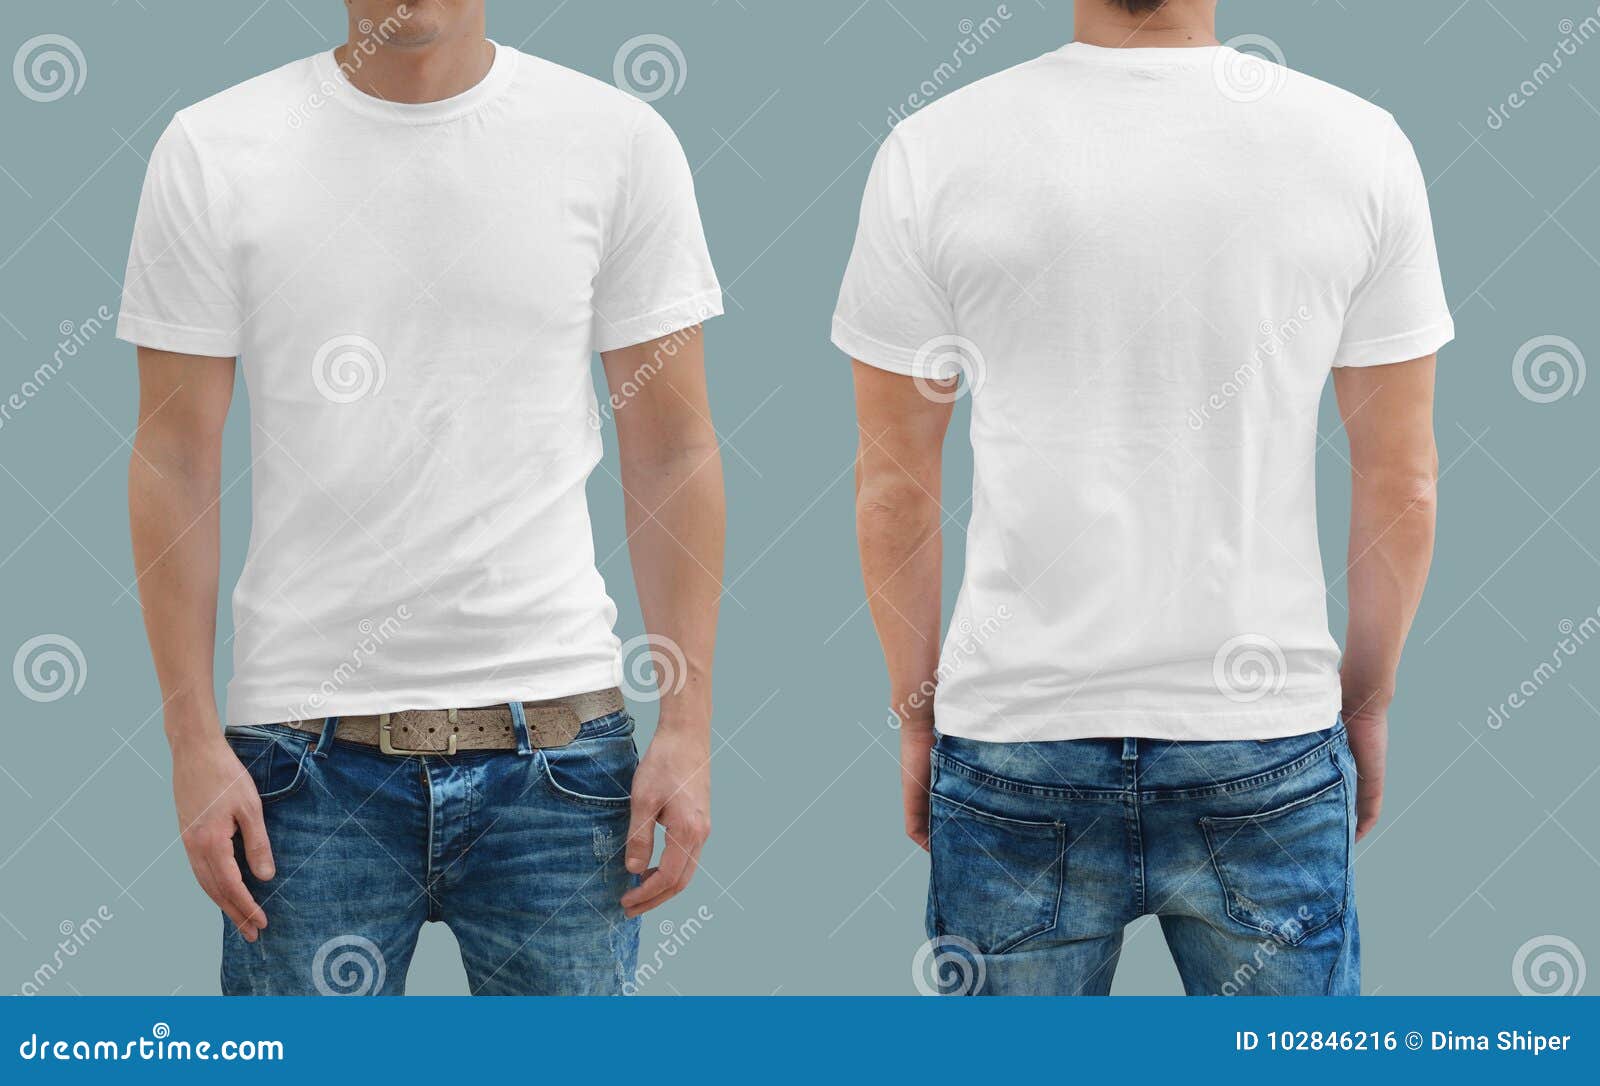 white tshirt on a young woman template